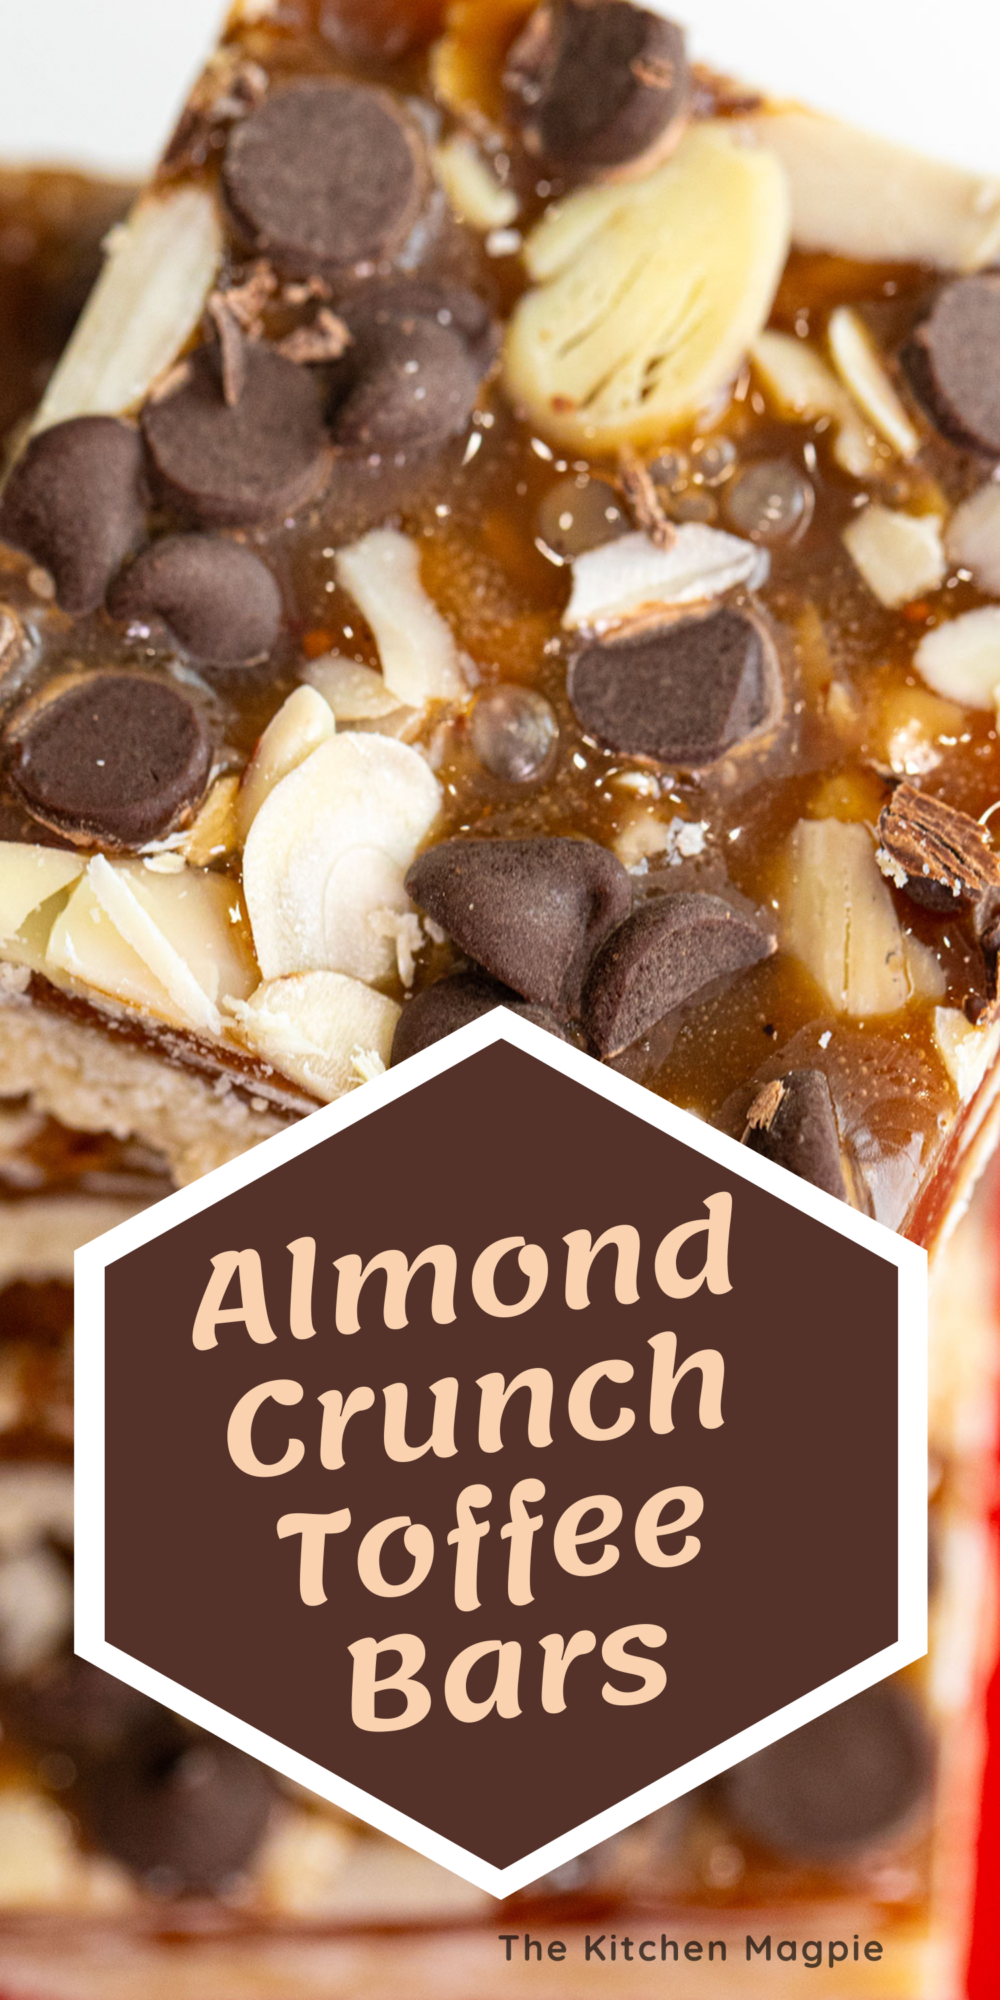 These decadent dessert bars have a delicious shortbread base that is topped with chocolate, toffee and, almonds!  